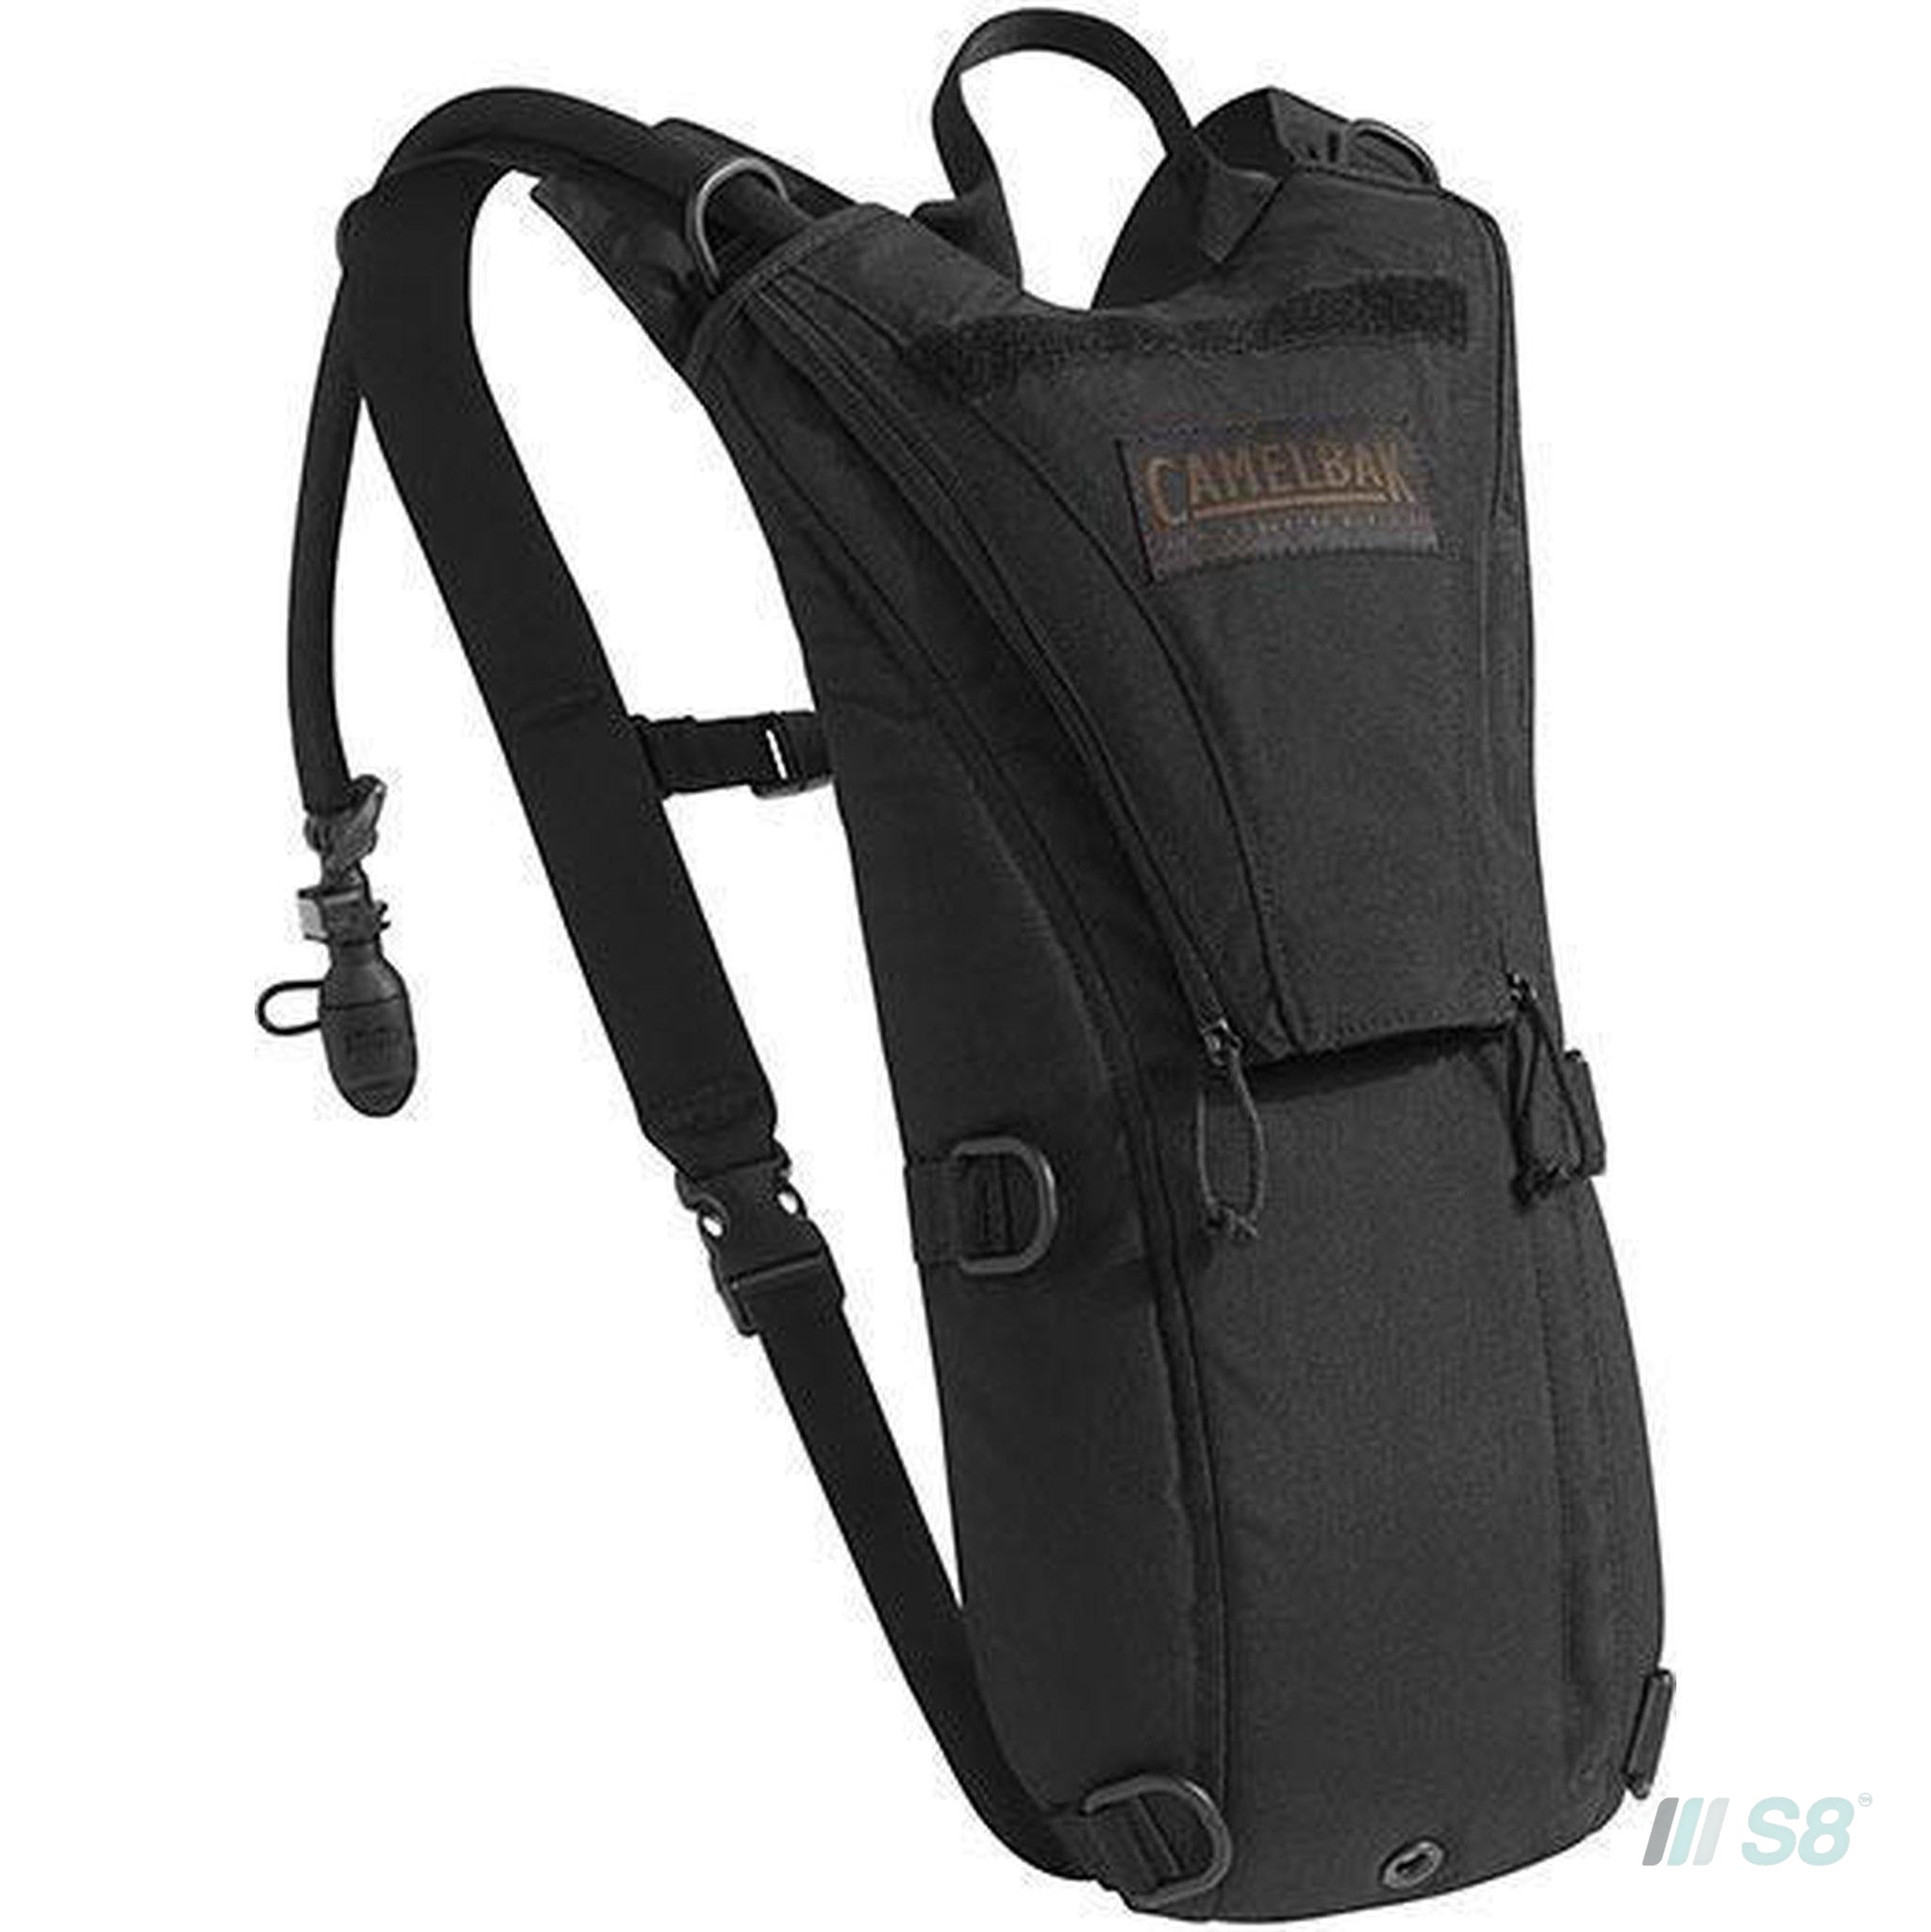 Camelbak Thermobak 3L Long Hydration Pack-Camelbak-S8 Products Group